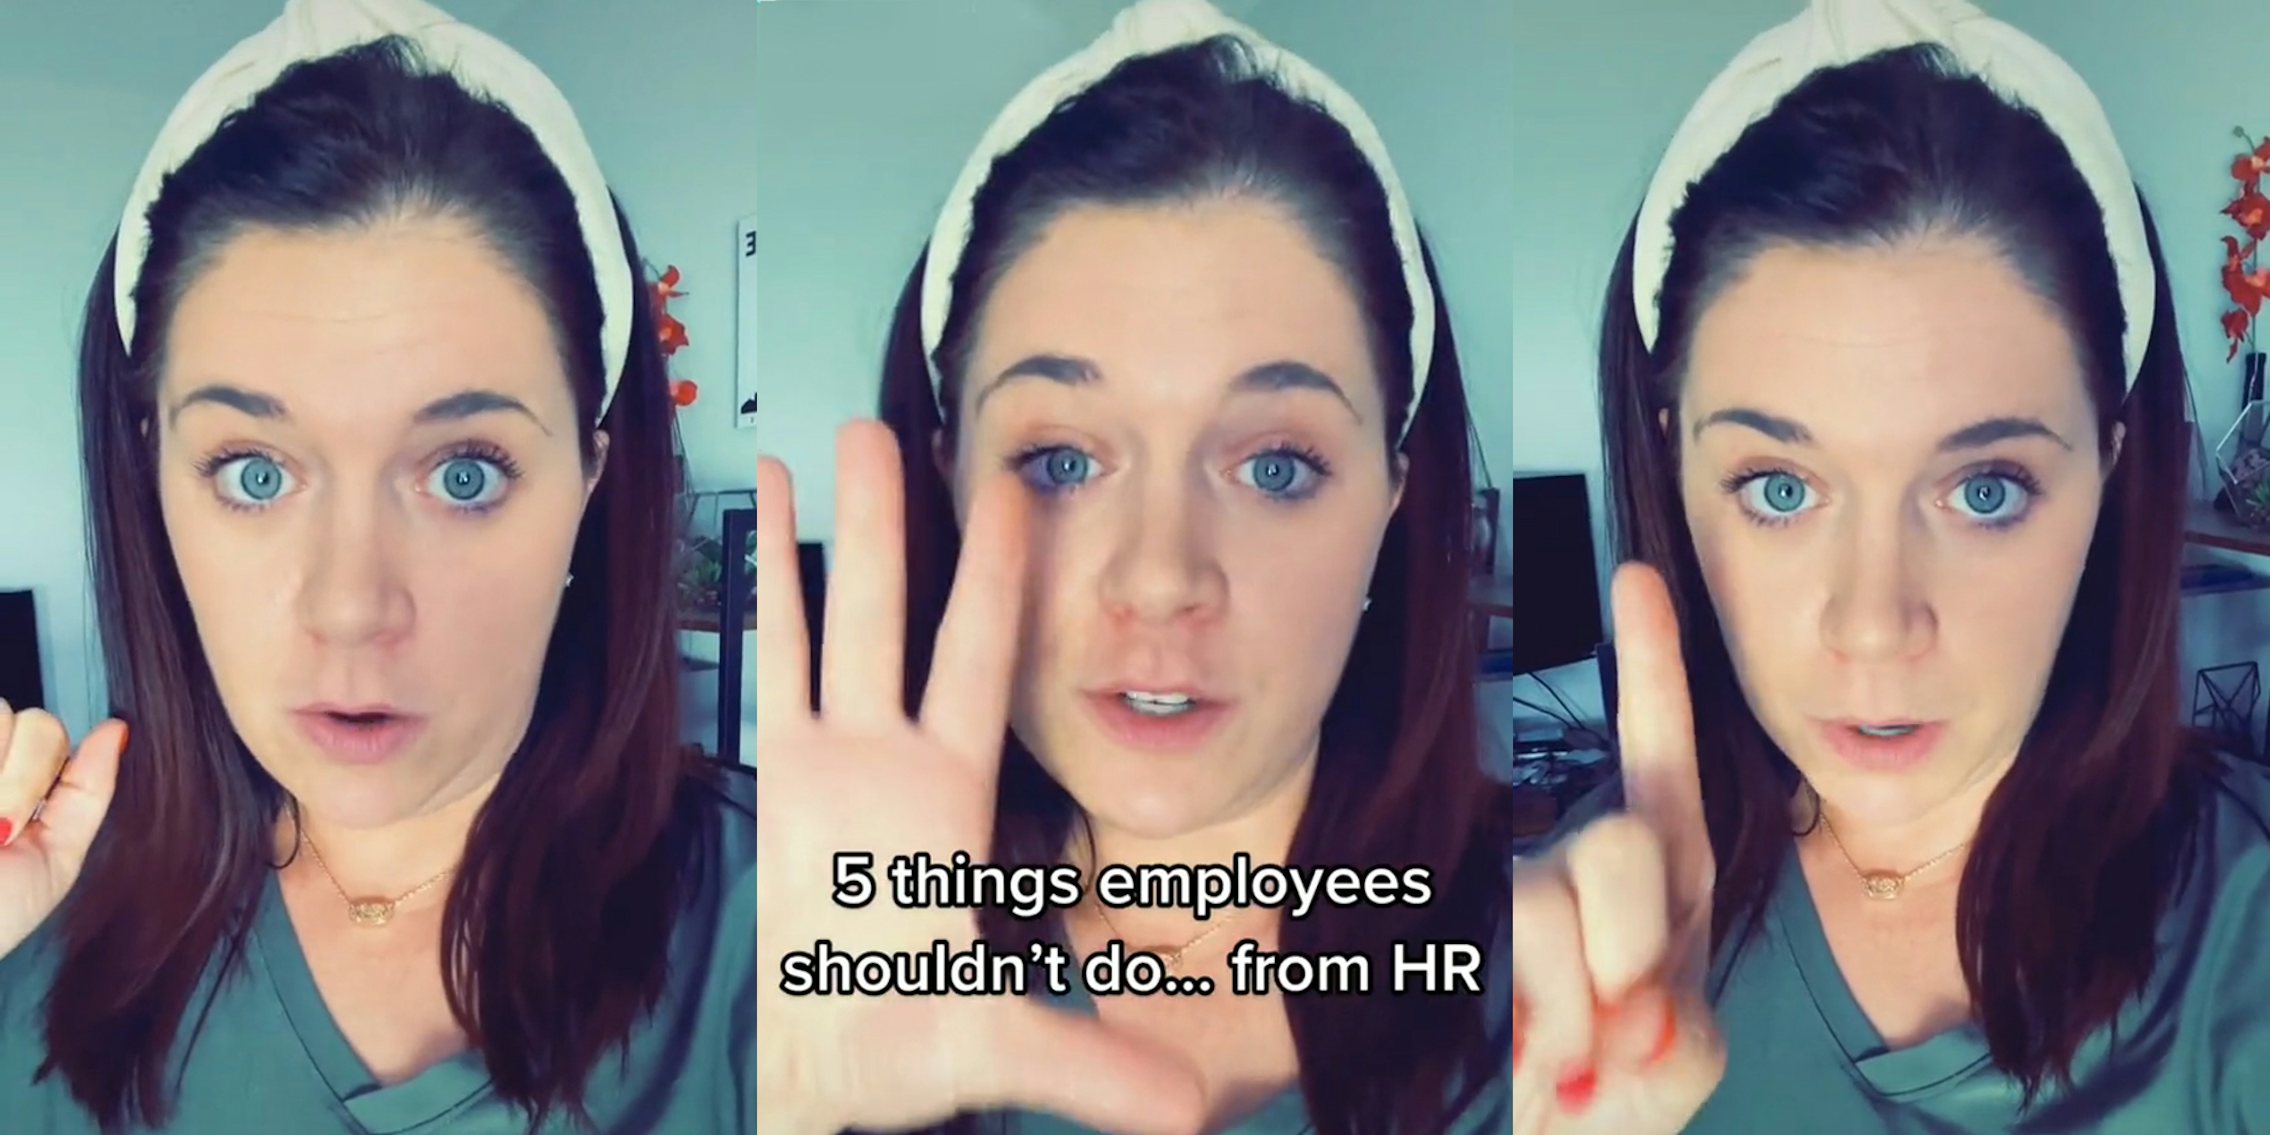 woman speaking hand up (l) woman speaking hand out caption '5 things employees shouldn't do... from HR' (c) woman speaking holding up finger (r)